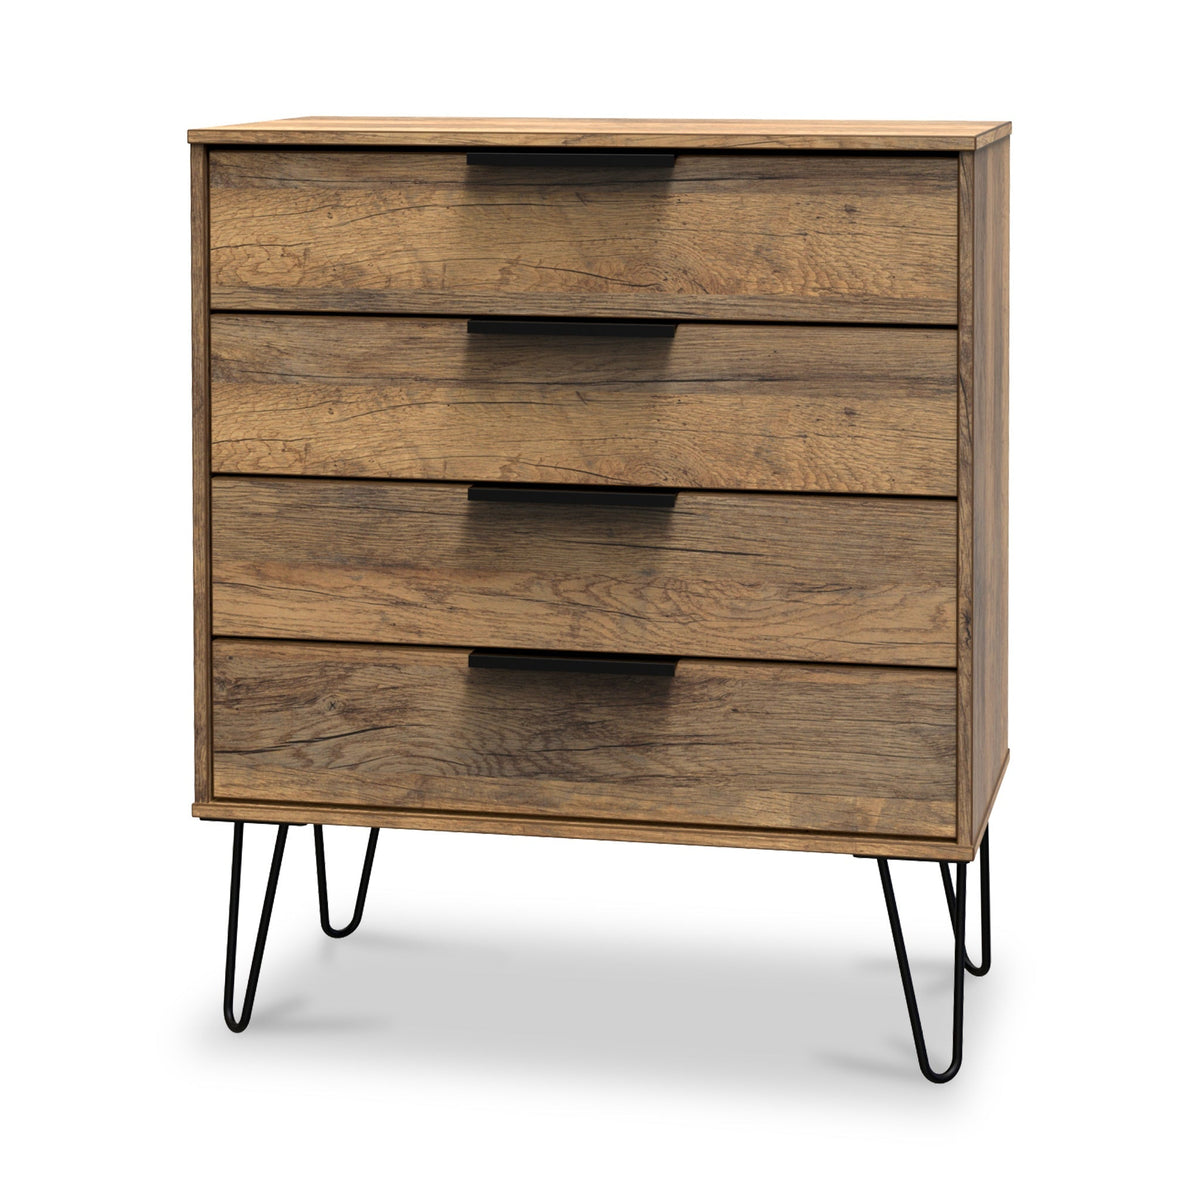 Moreno Rustic Oak Wooden 4 Drawer Chest with Black Hairpin Legs